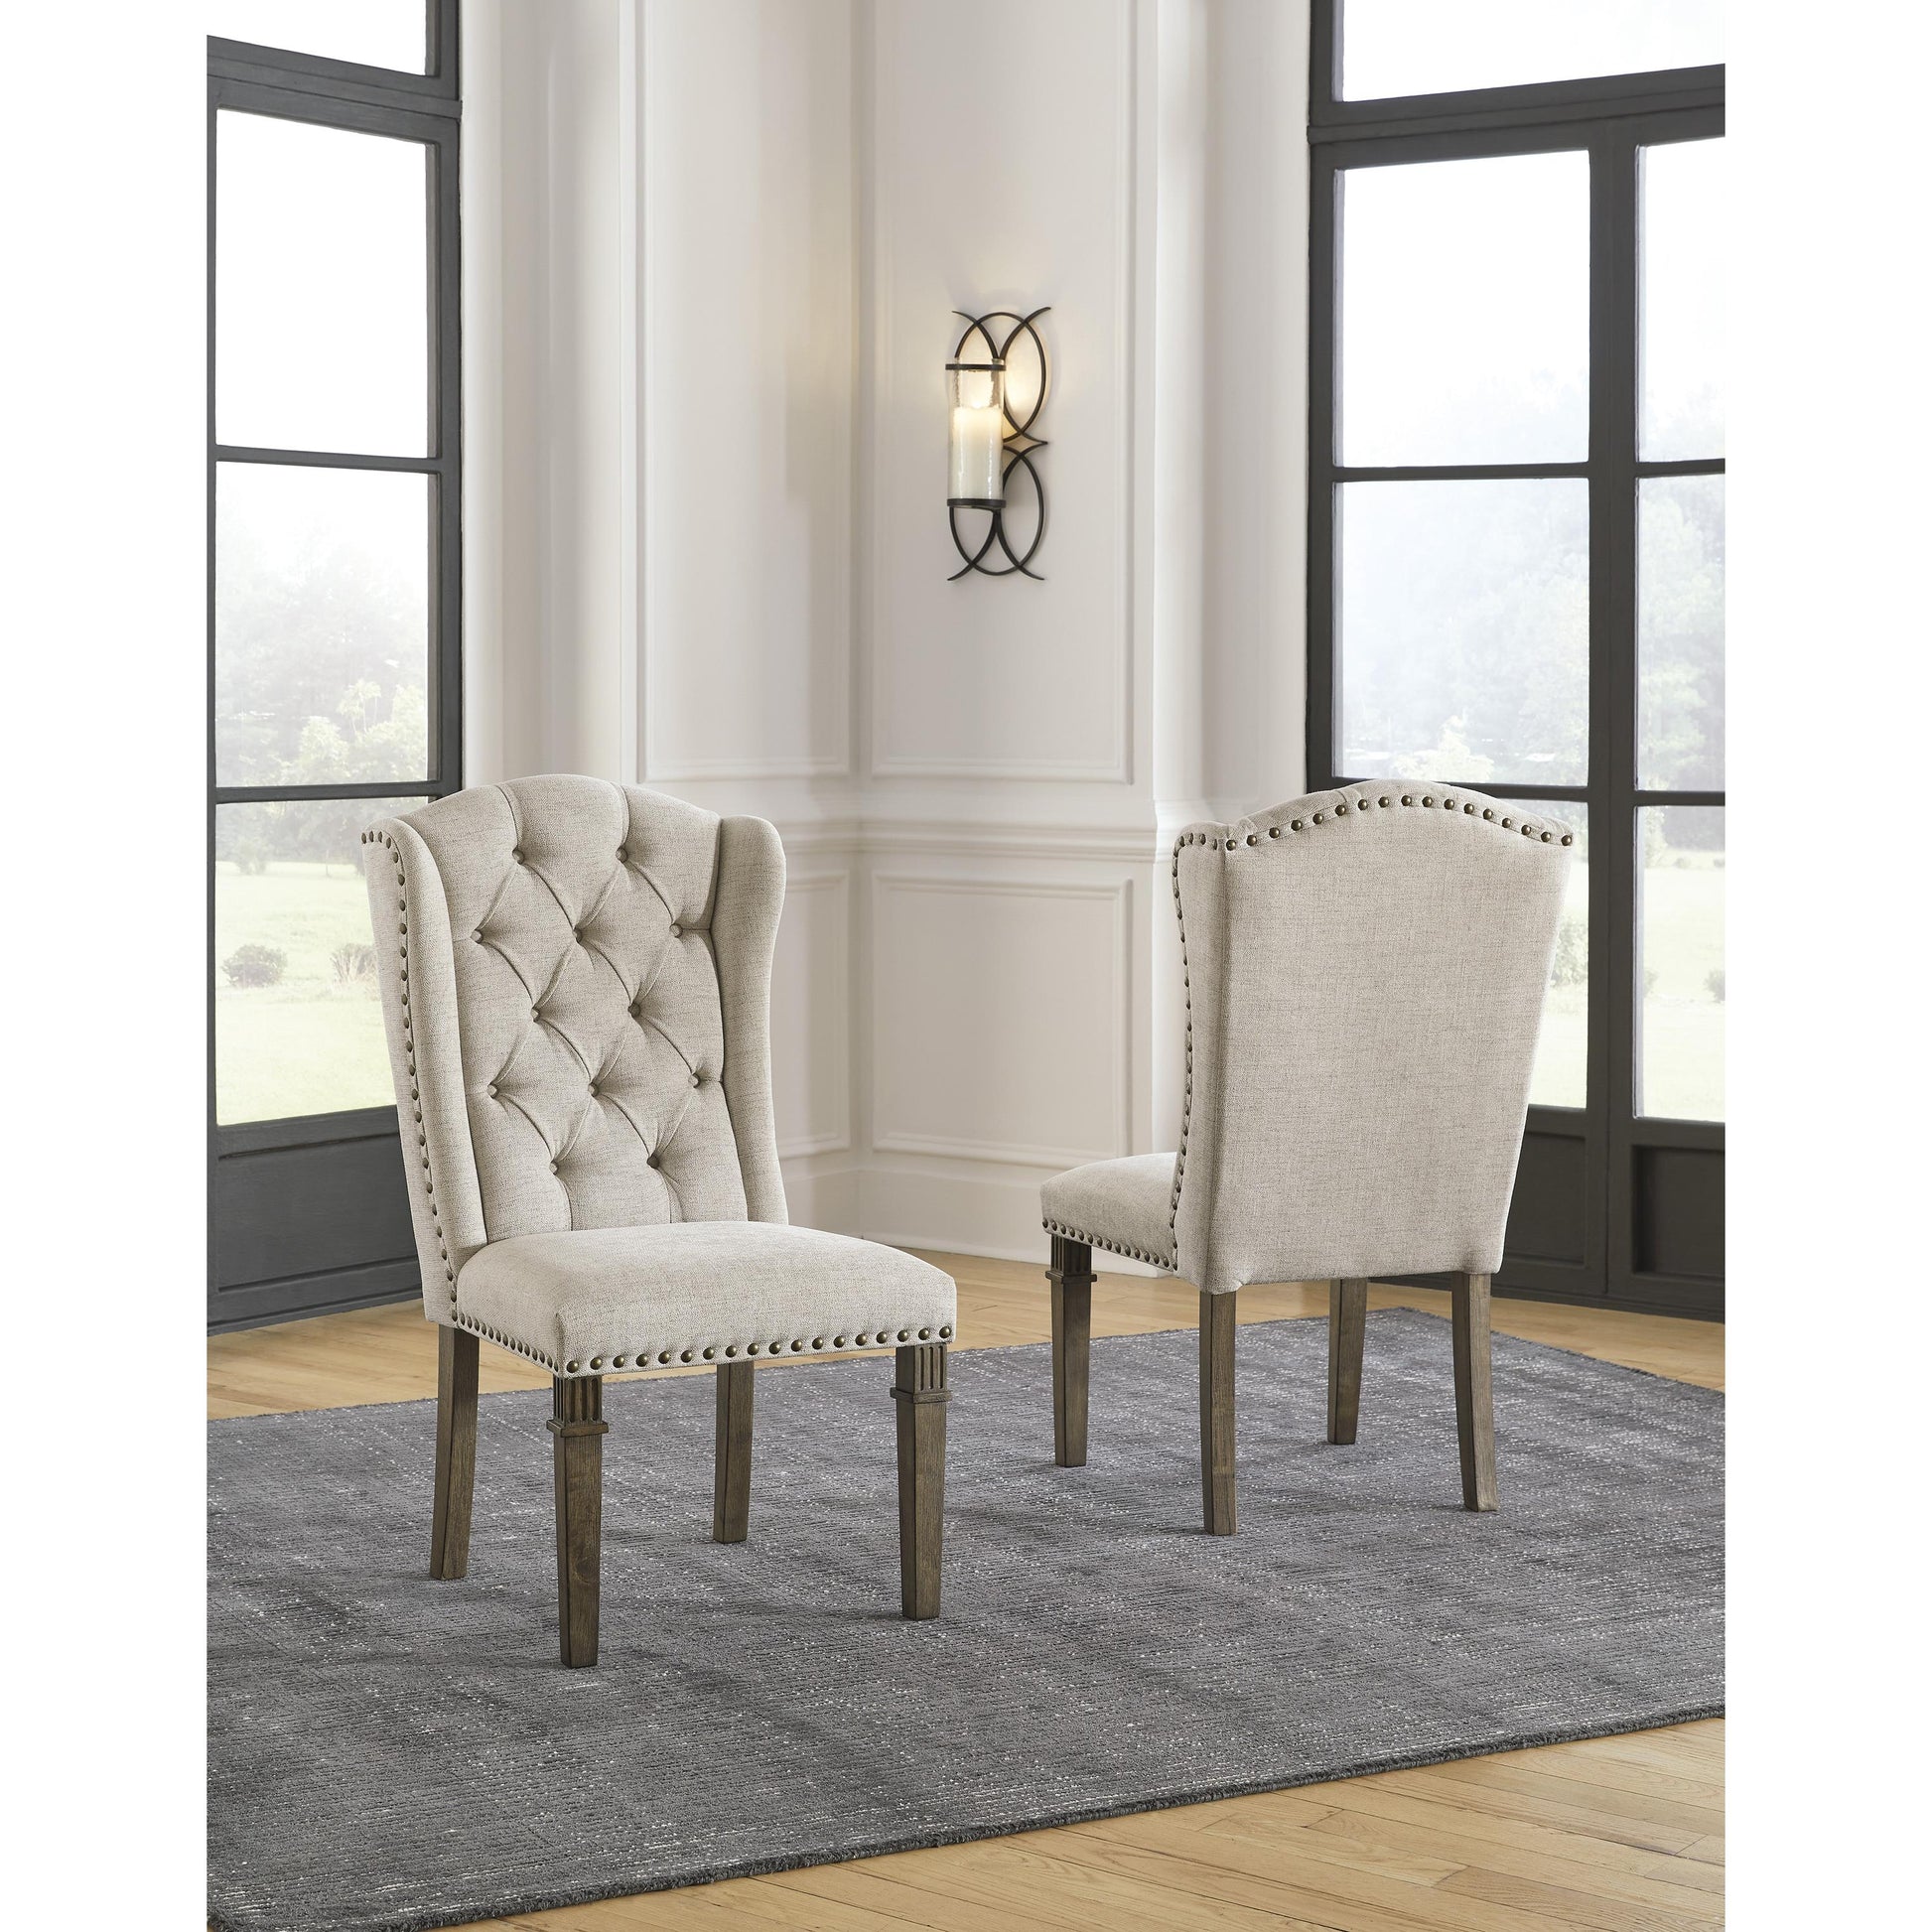 Signature Design by Ashley Markenburg Dining Chair D770-02 IMAGE 5